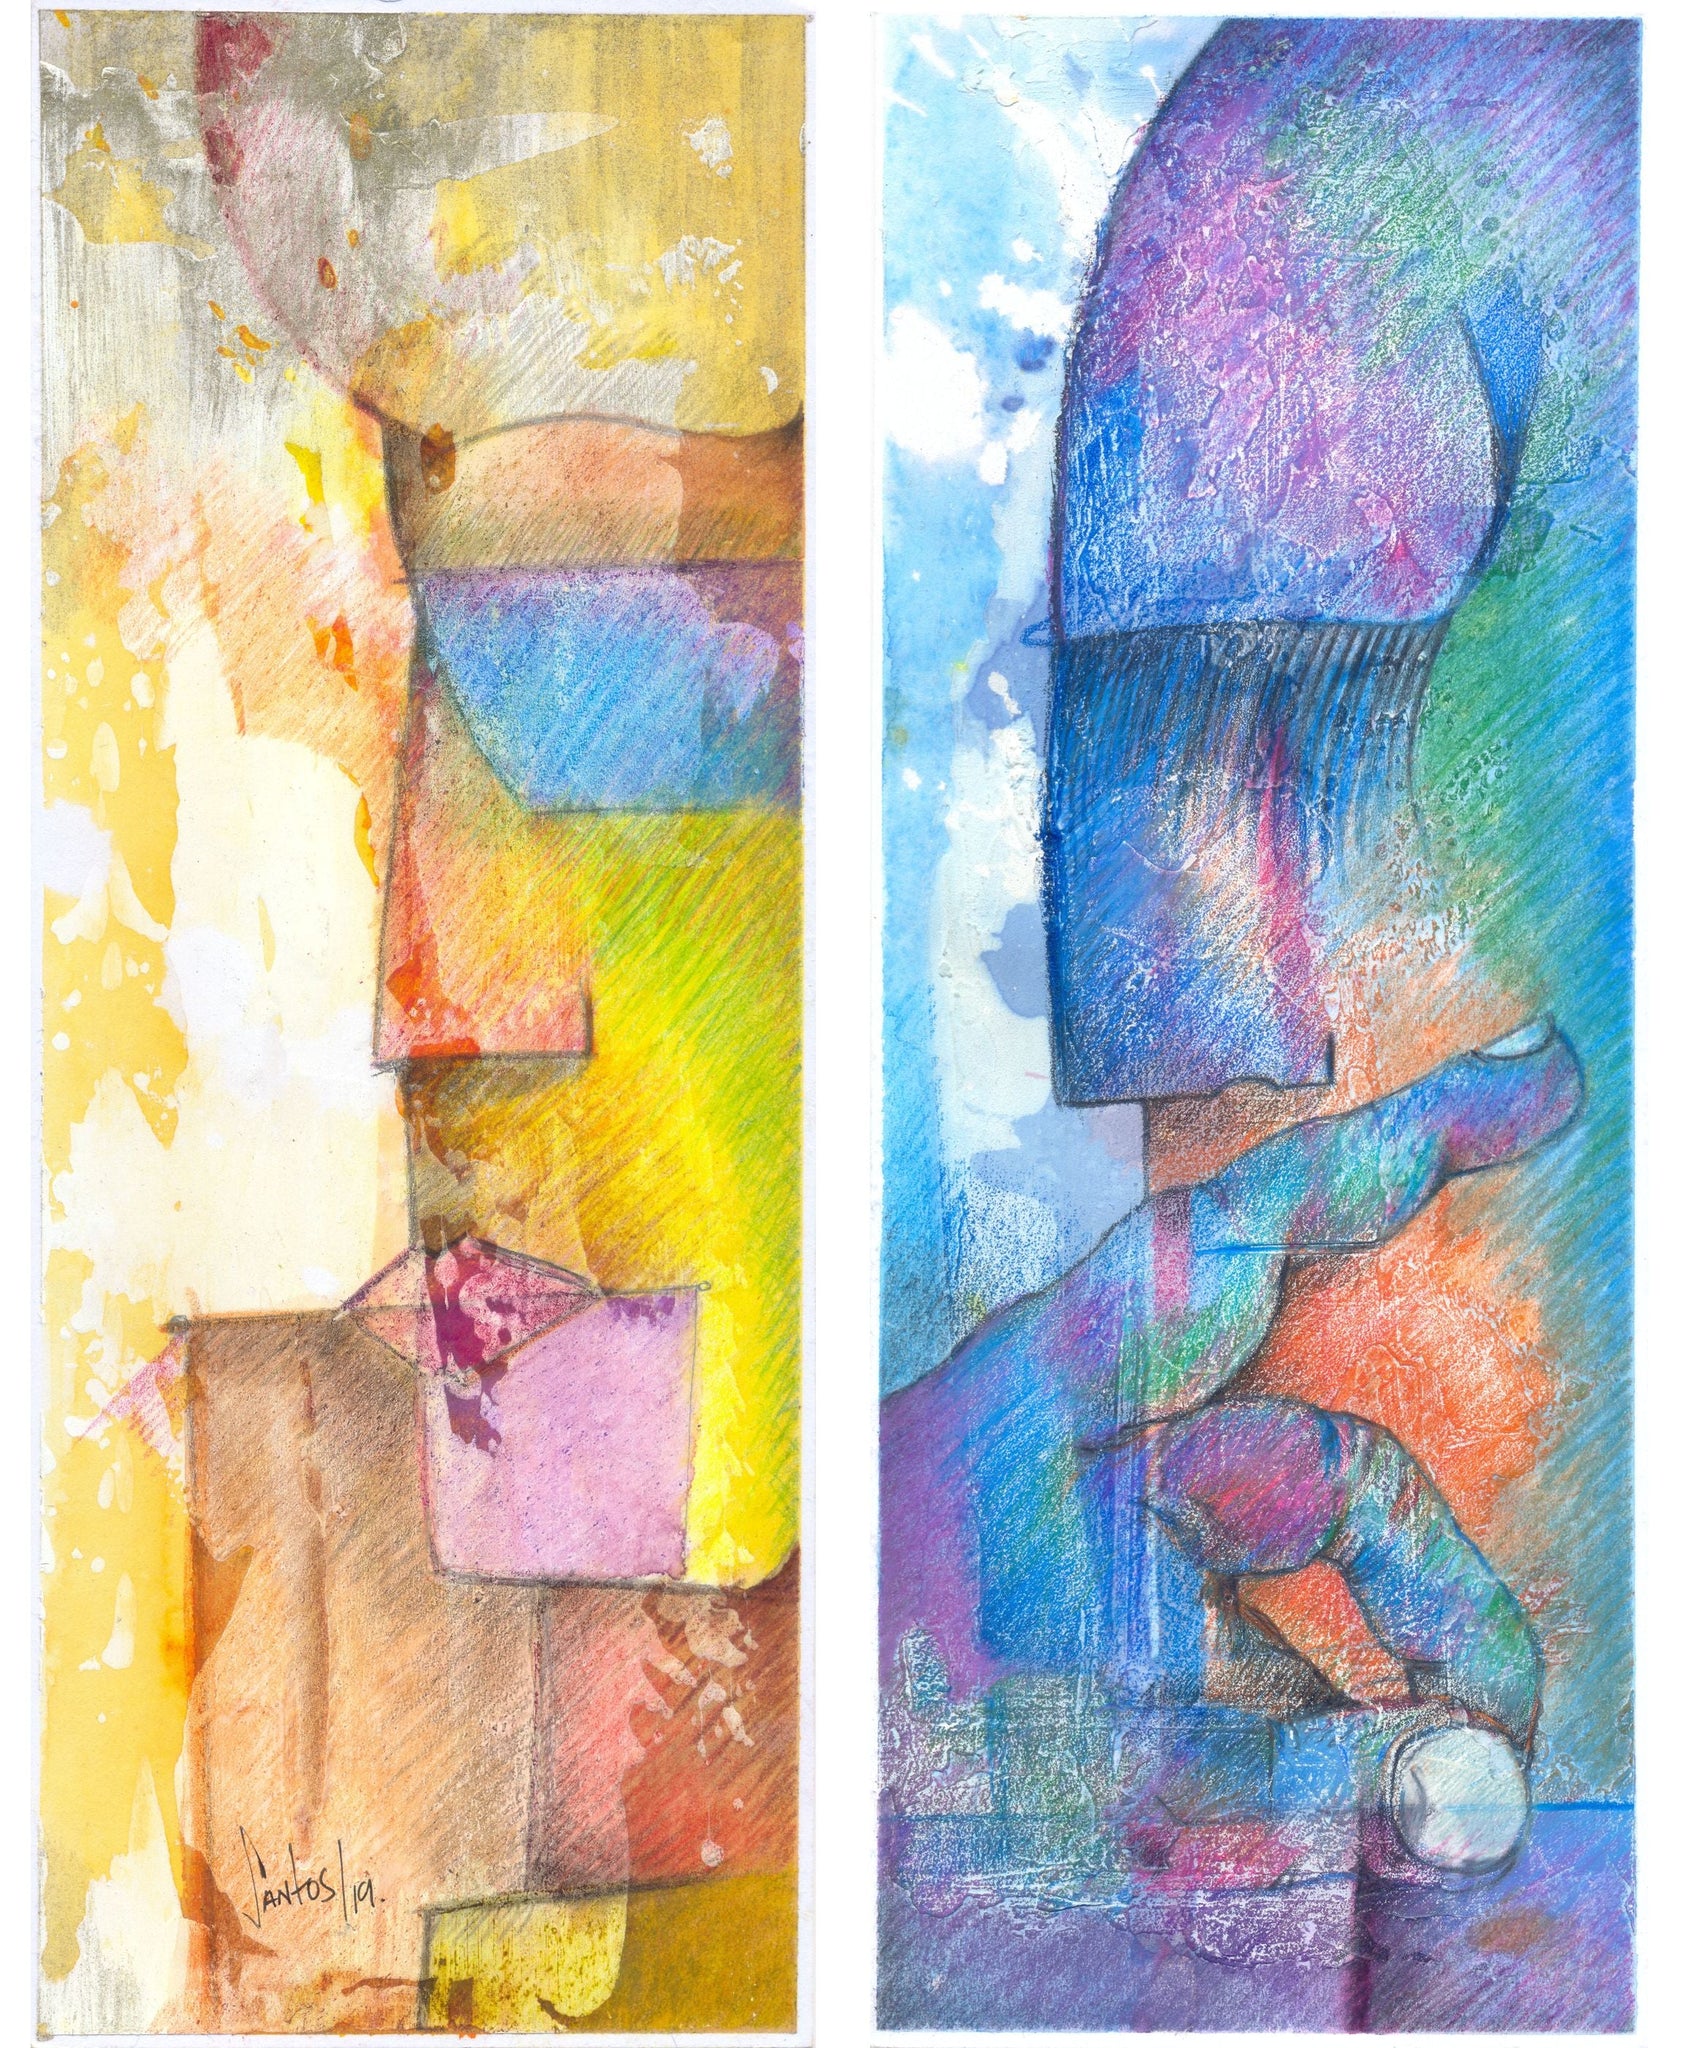 Contrast (Diptych)